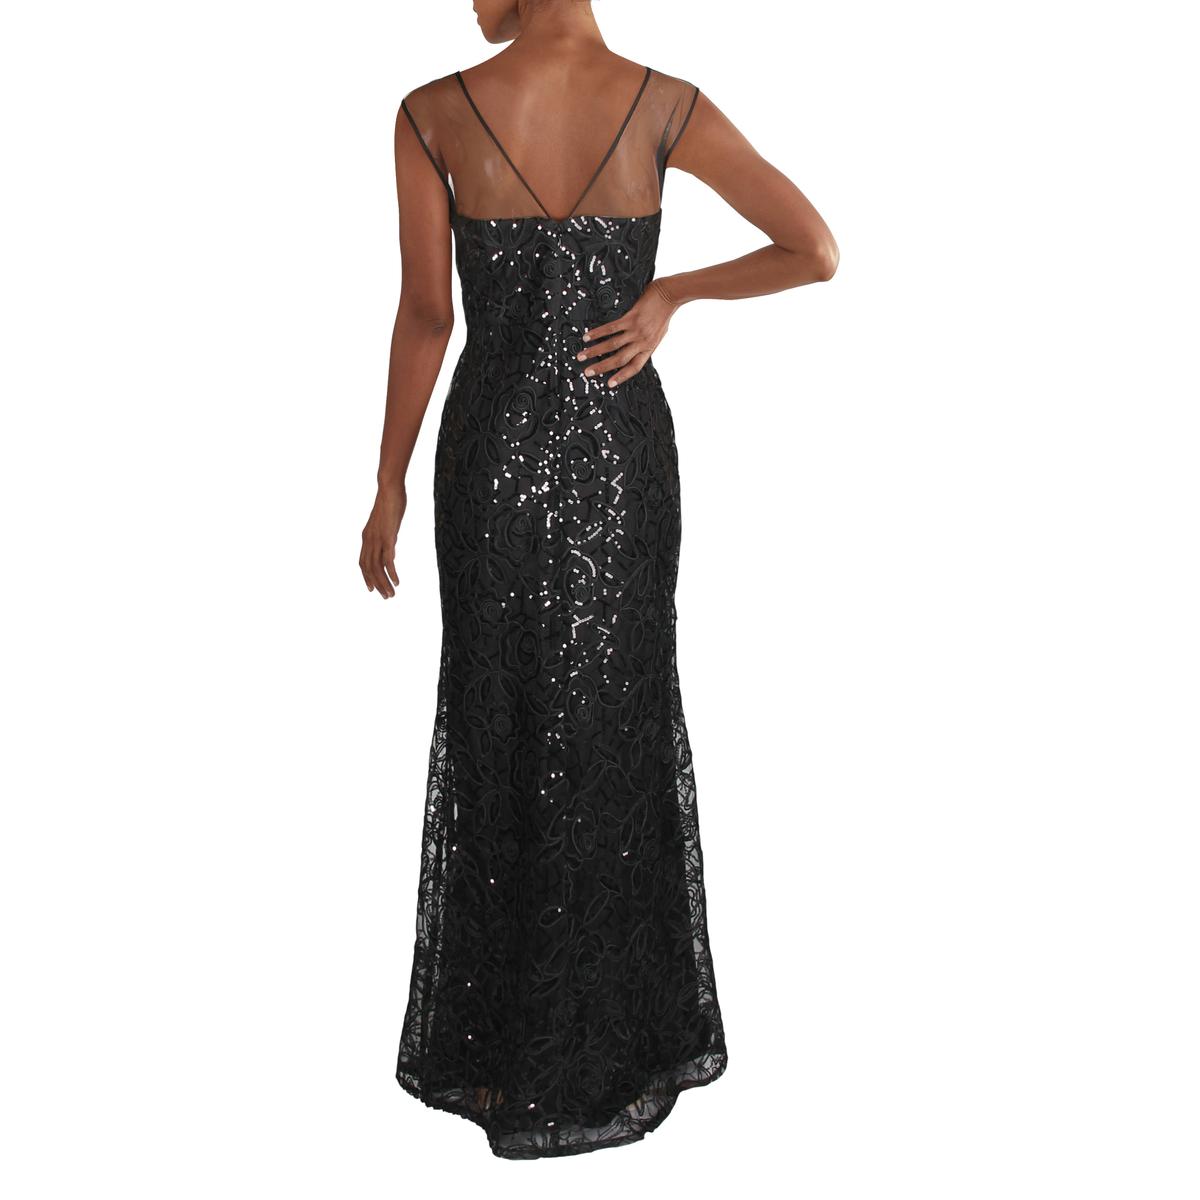 Ignite Evenings Womens Black Sequined Illusion Evening Dress Gown 6 ...